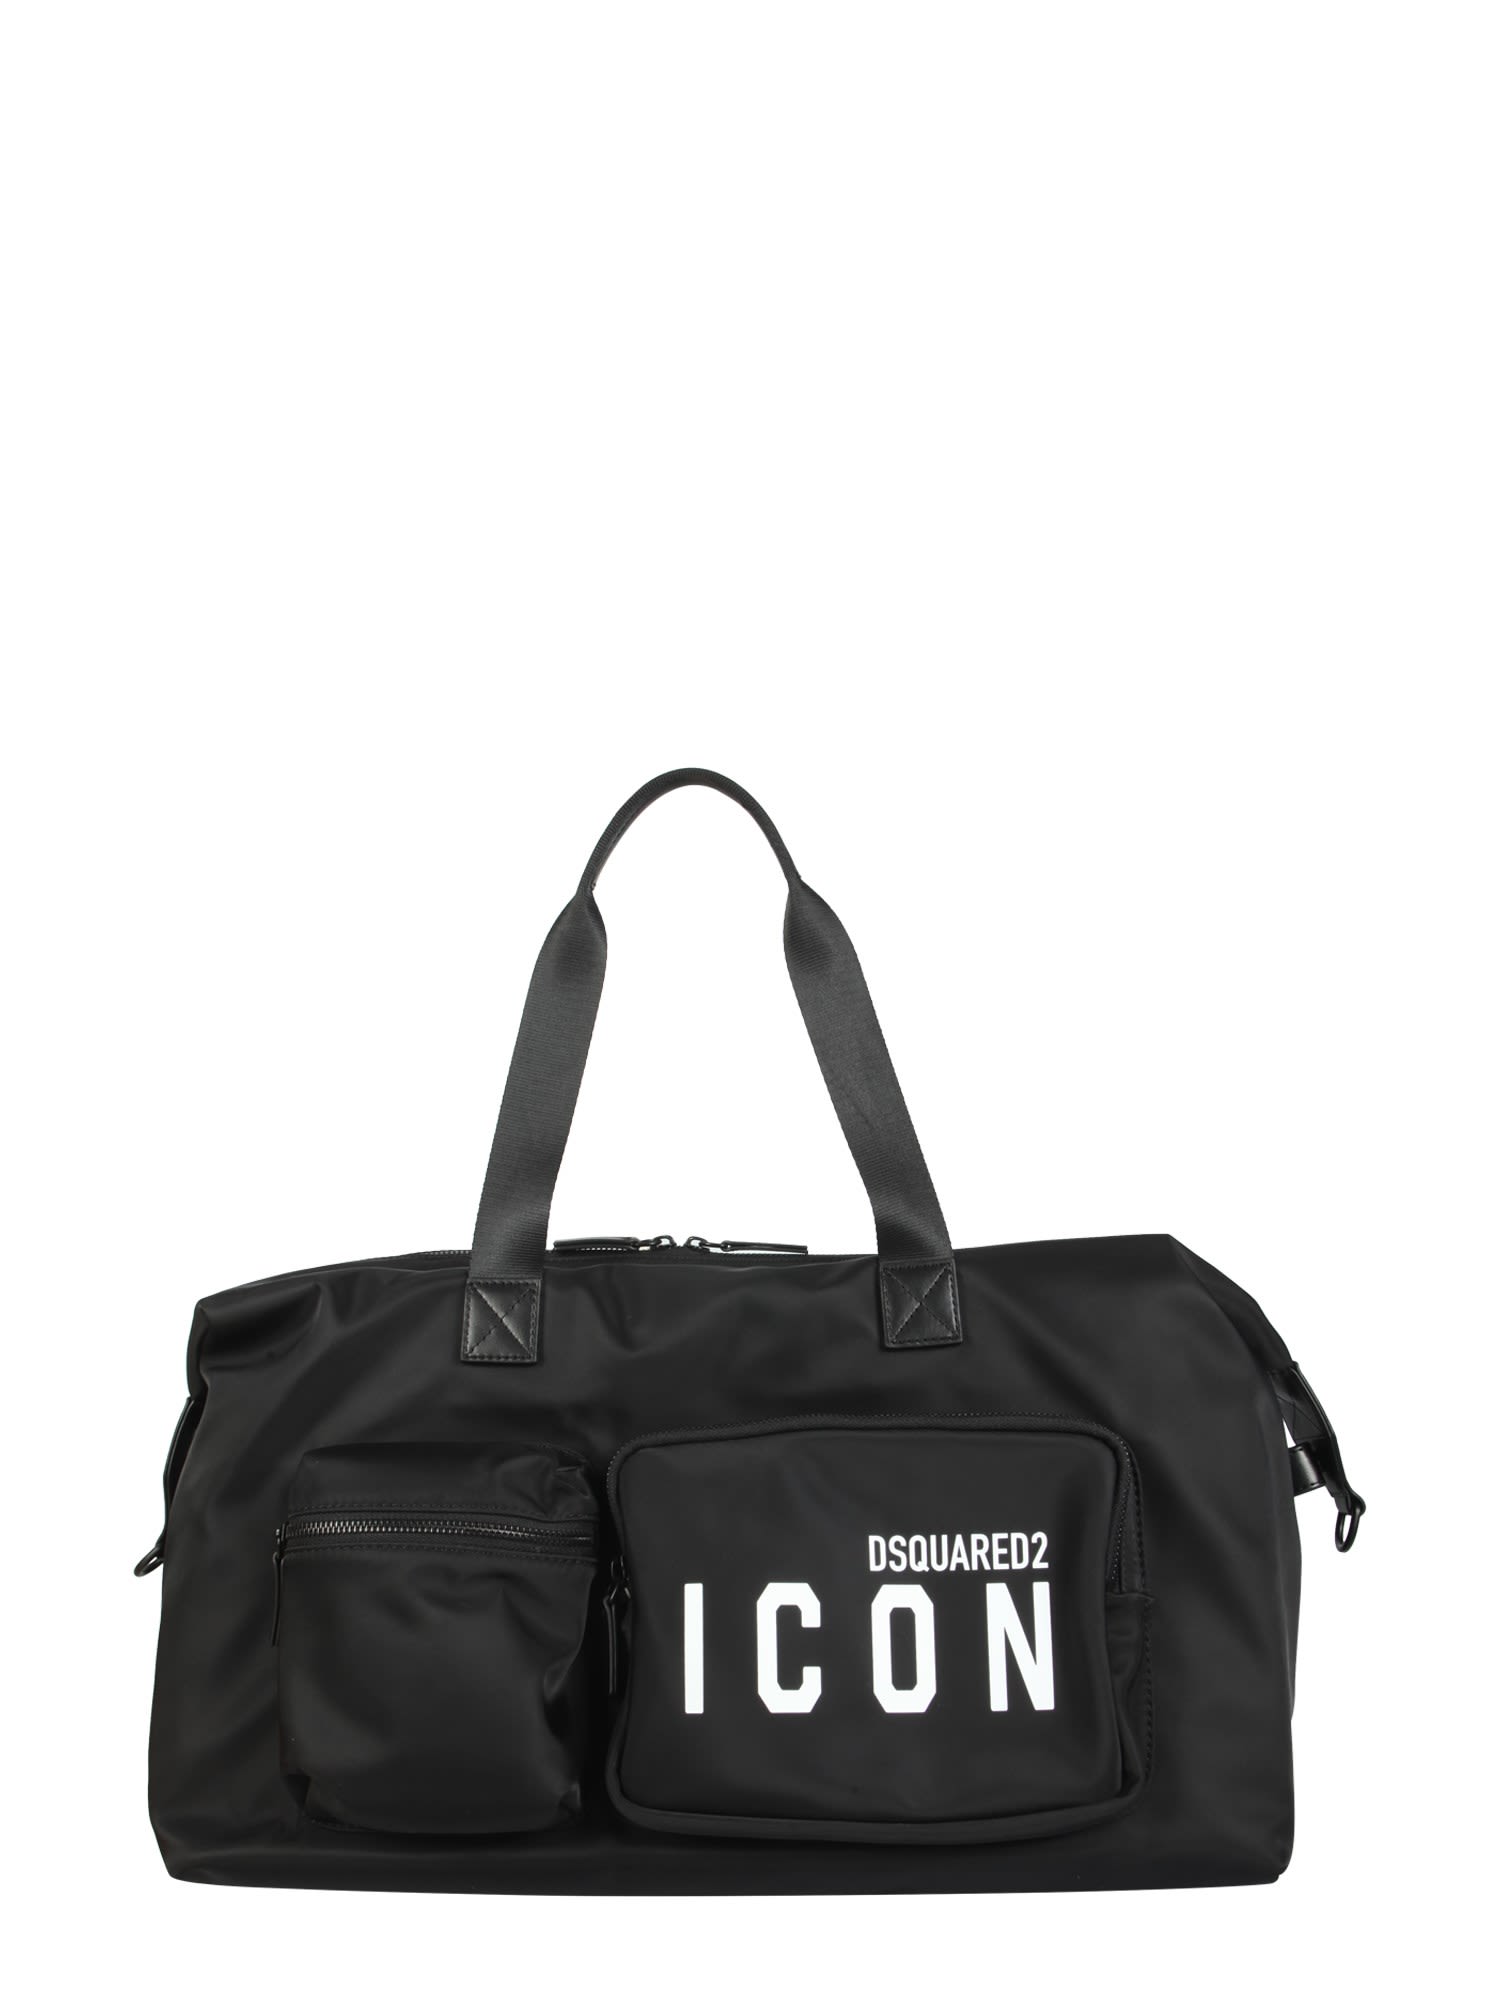 Dsquared2 Duffle Bag With Icon Print